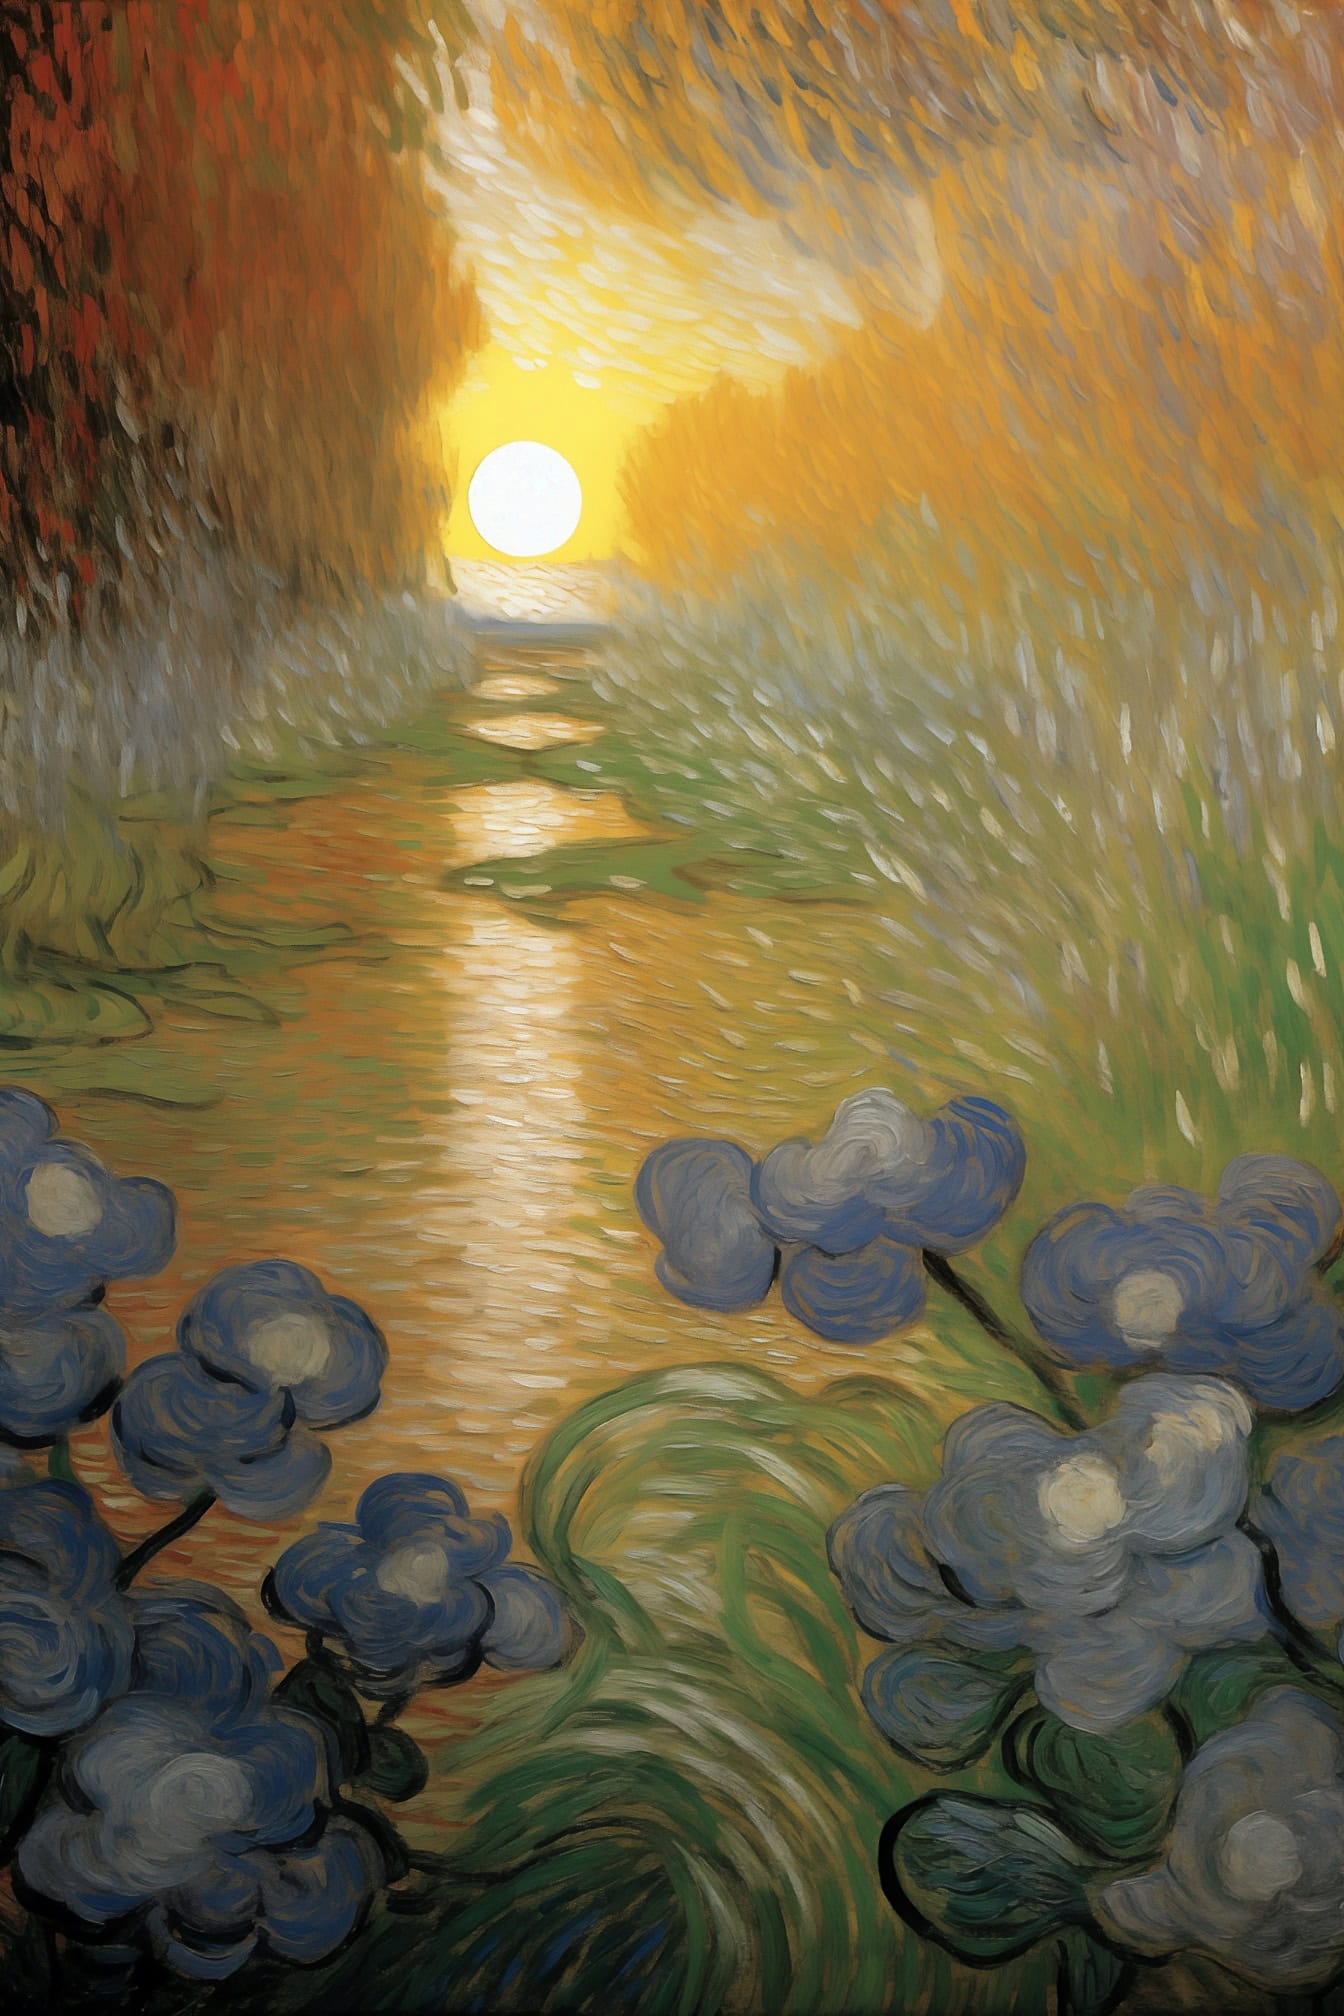 Oil painting of flowers and water at sunset in a style of famous artist Van Gogh